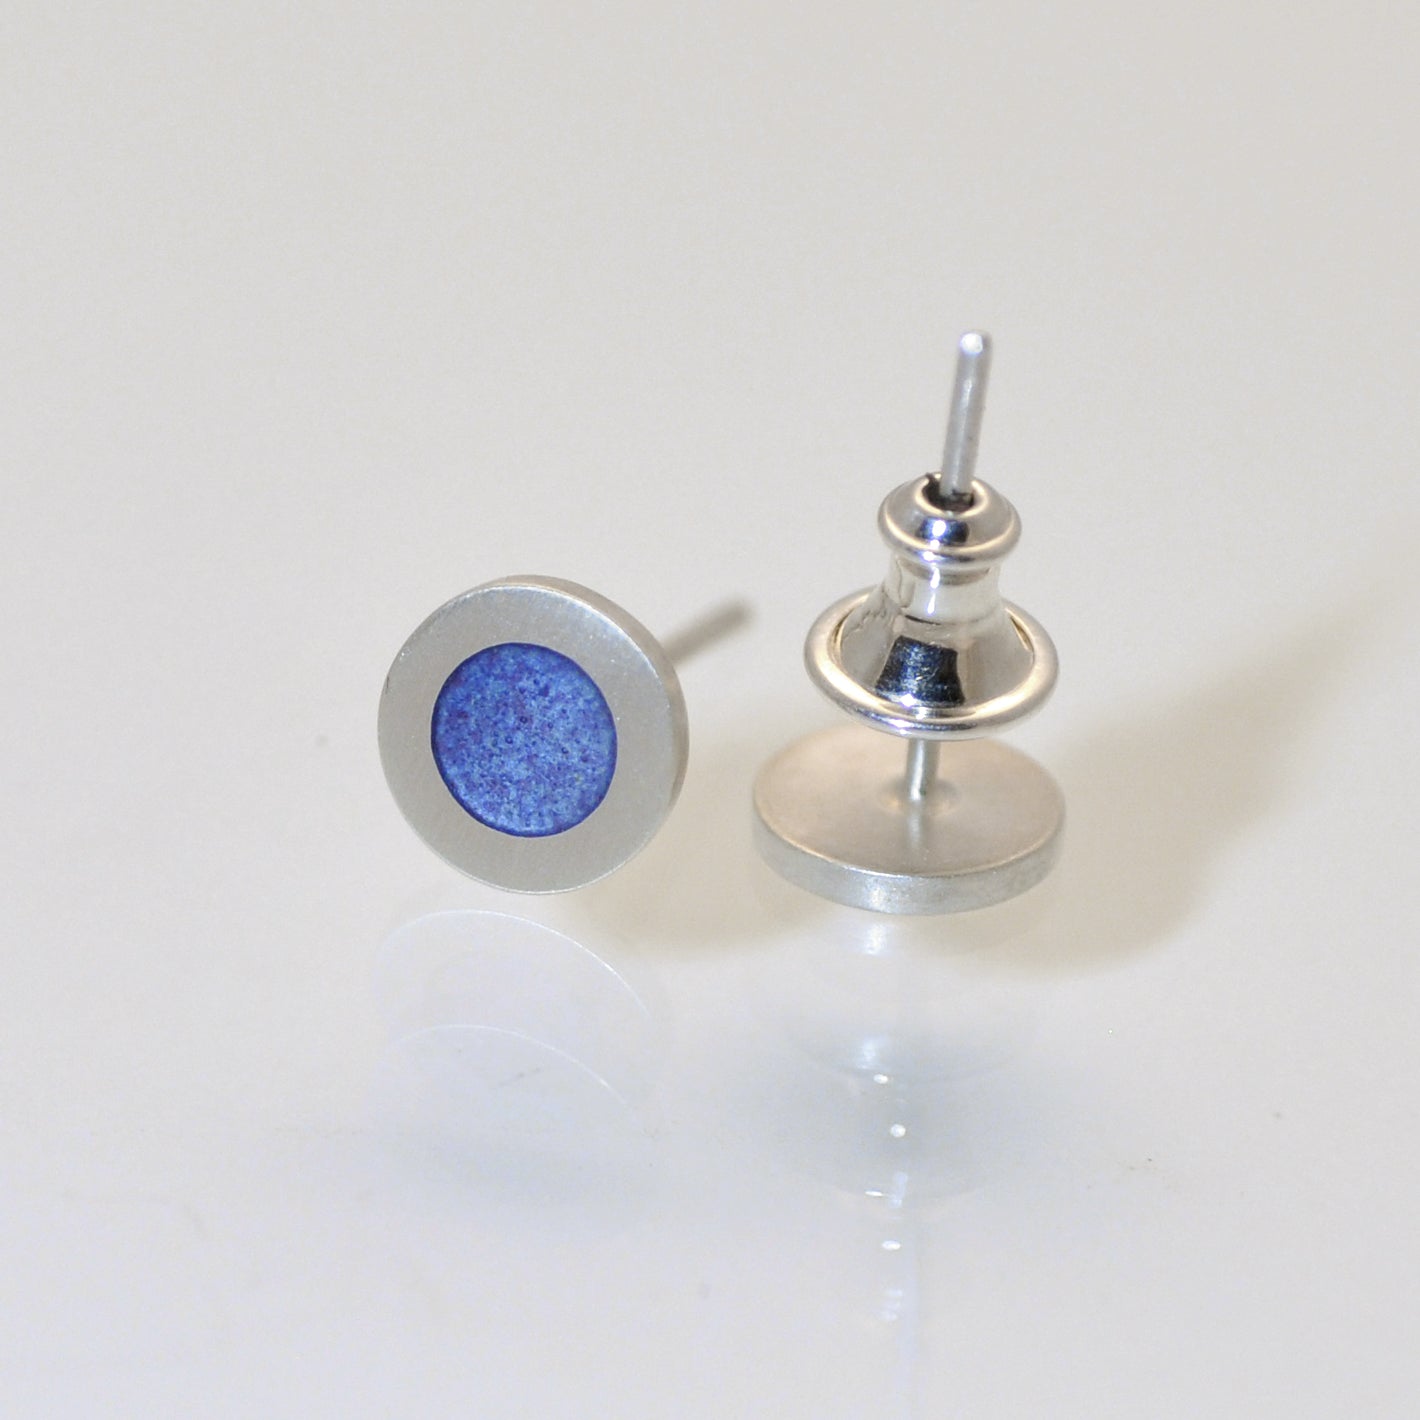 Small flat round ear studs with coloured enamel in the centre